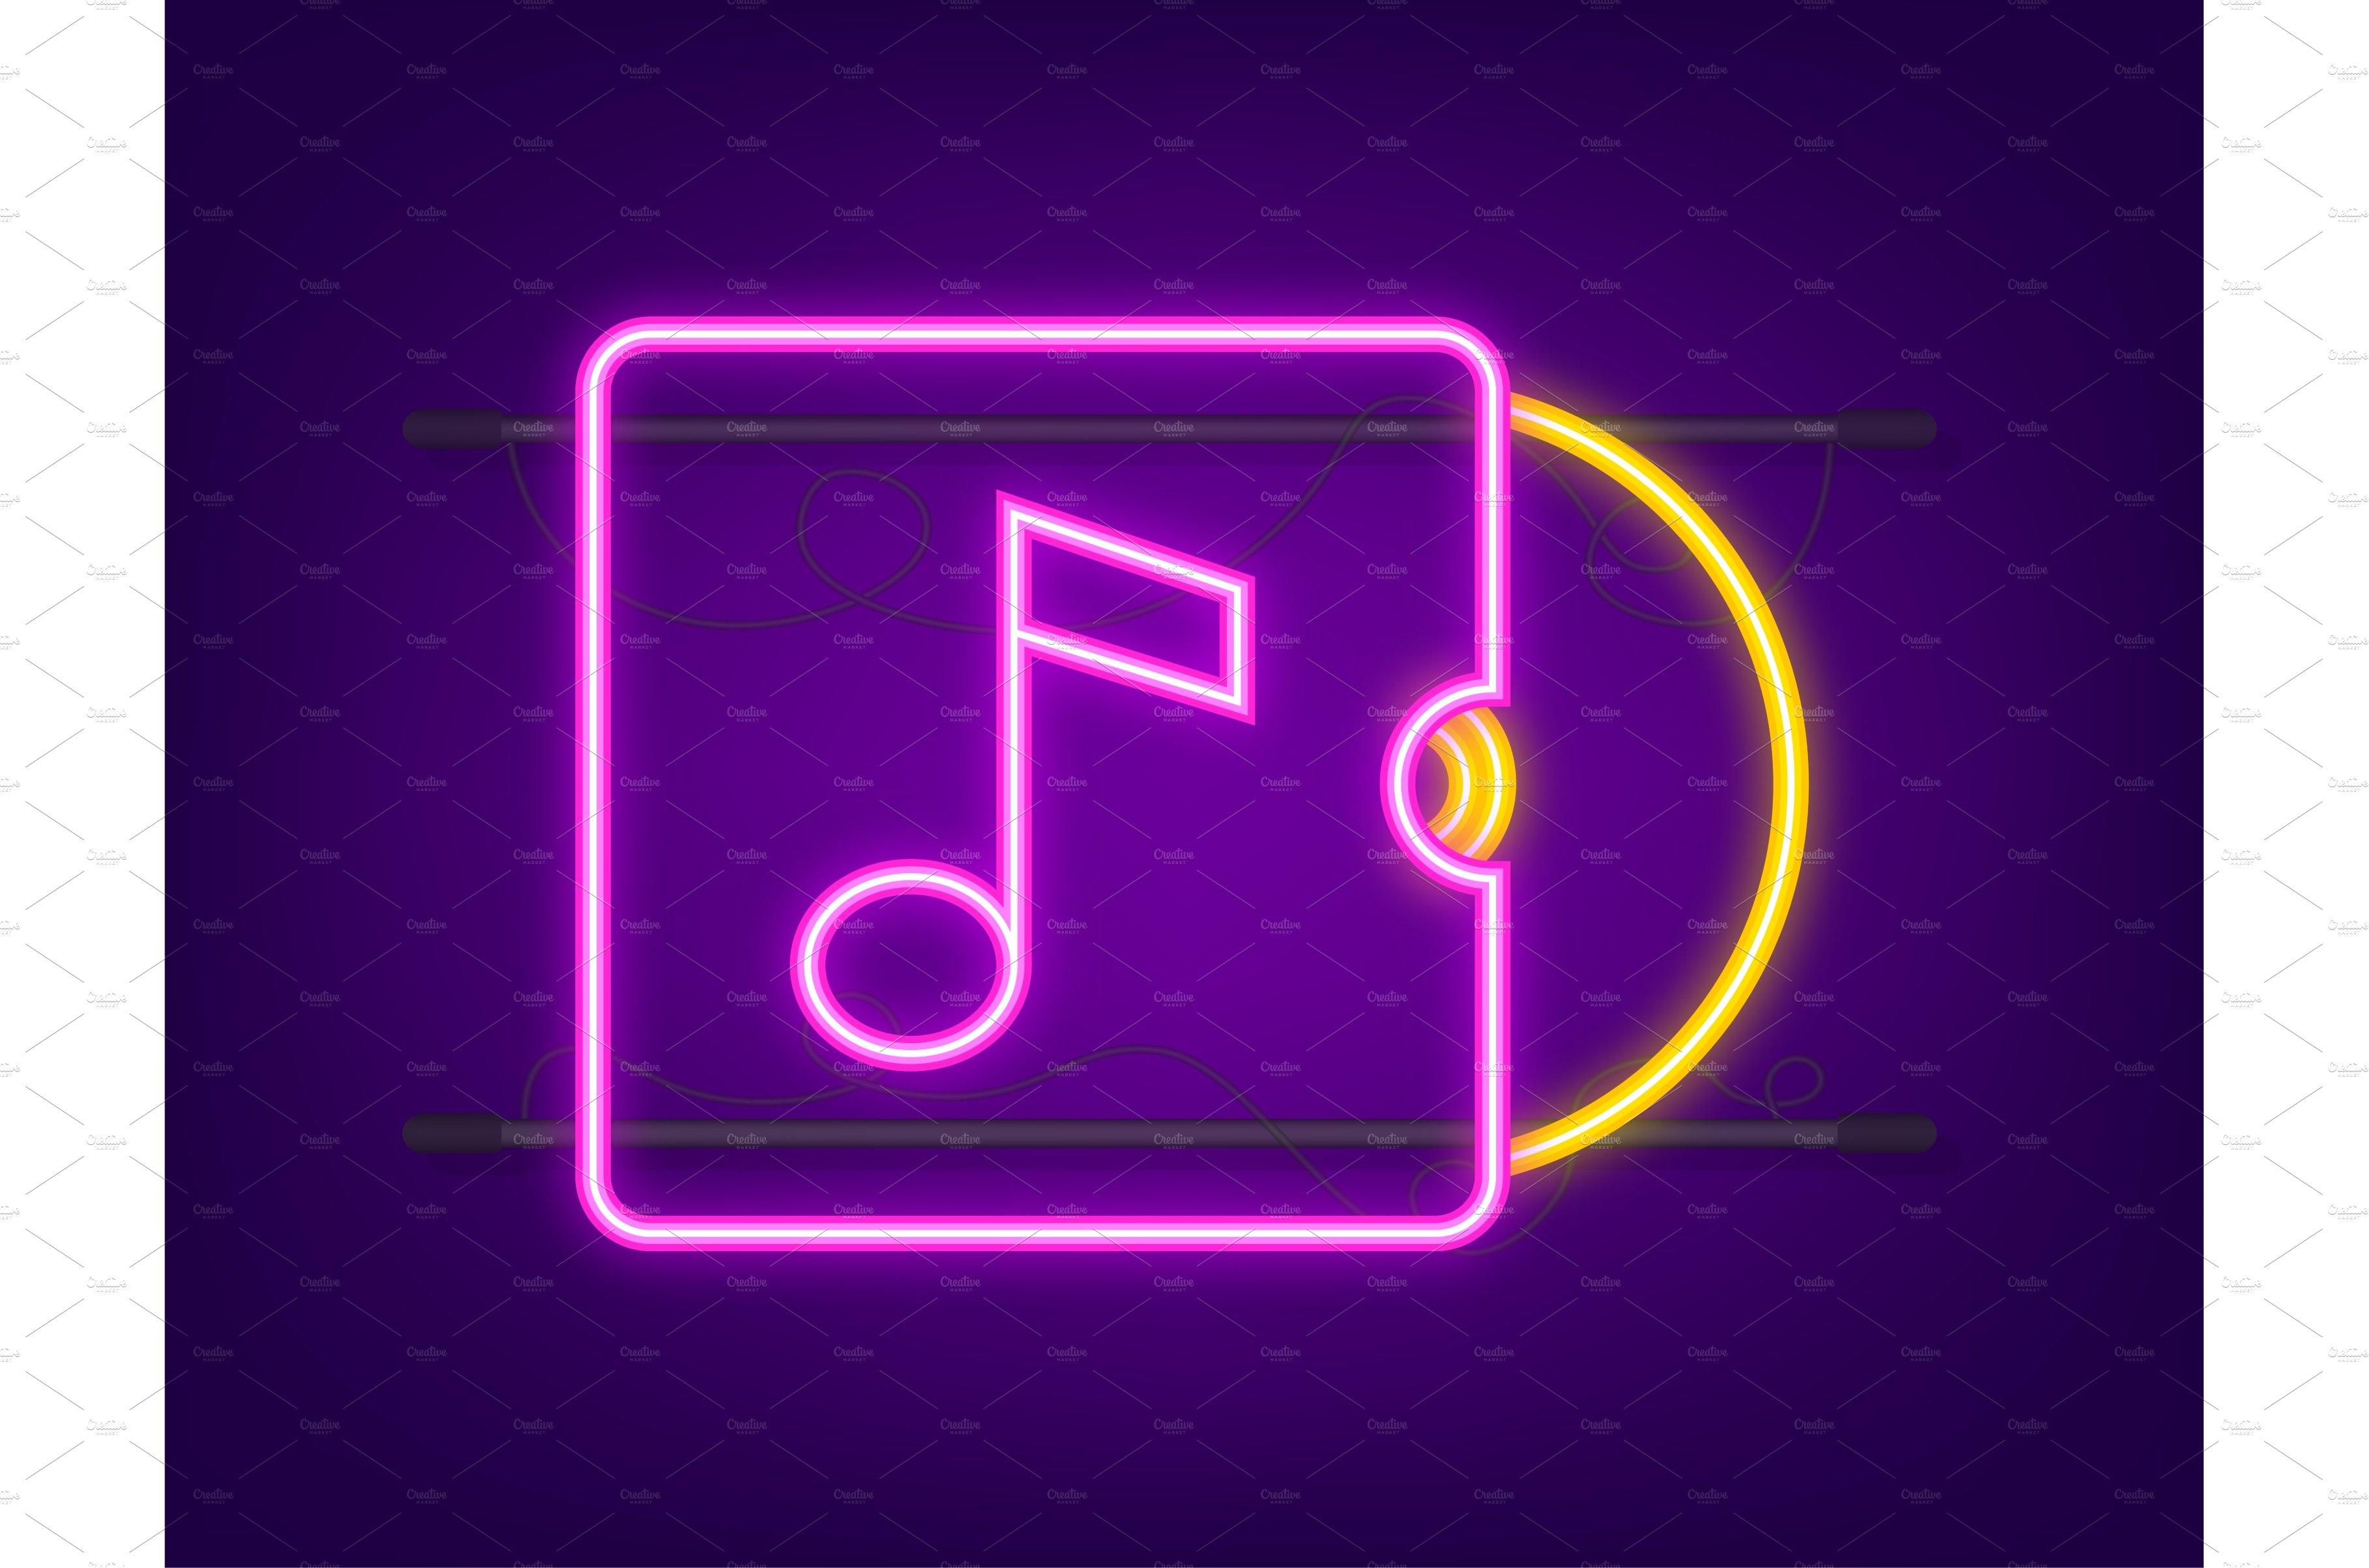 Music neon icon in flat style. Music cover image.